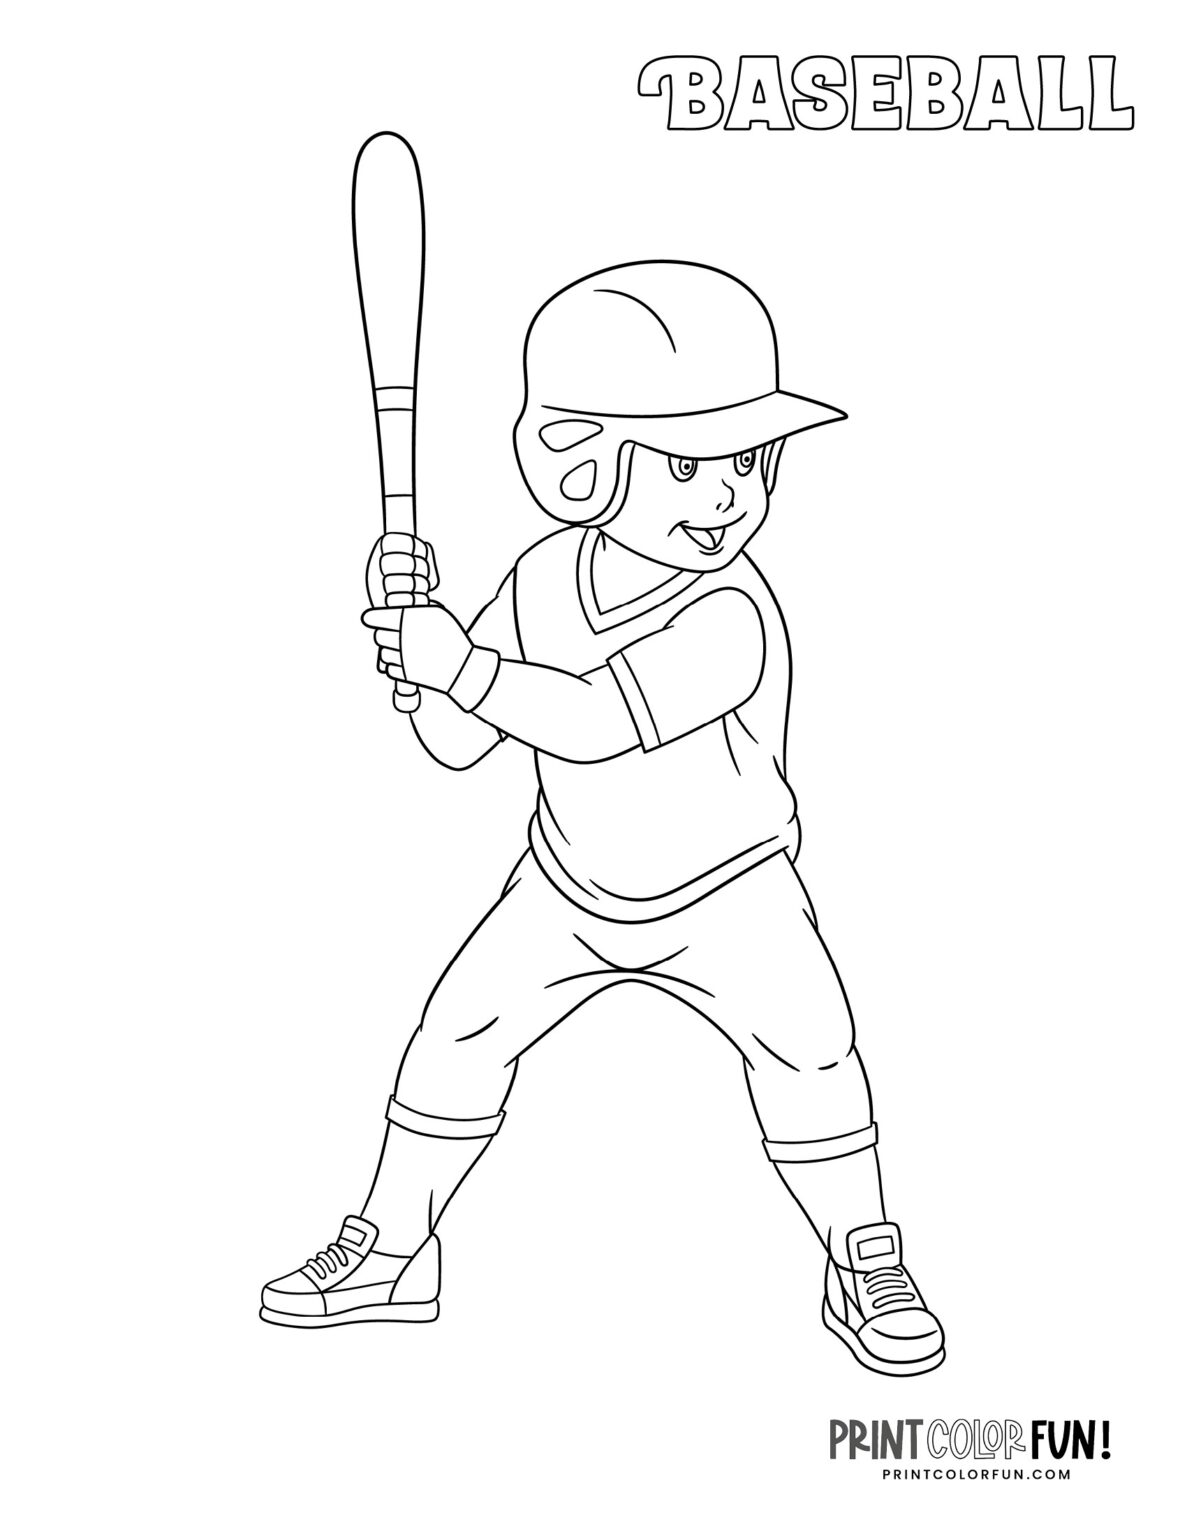 16 baseball player coloring pages & clipart: Free sports printables, at